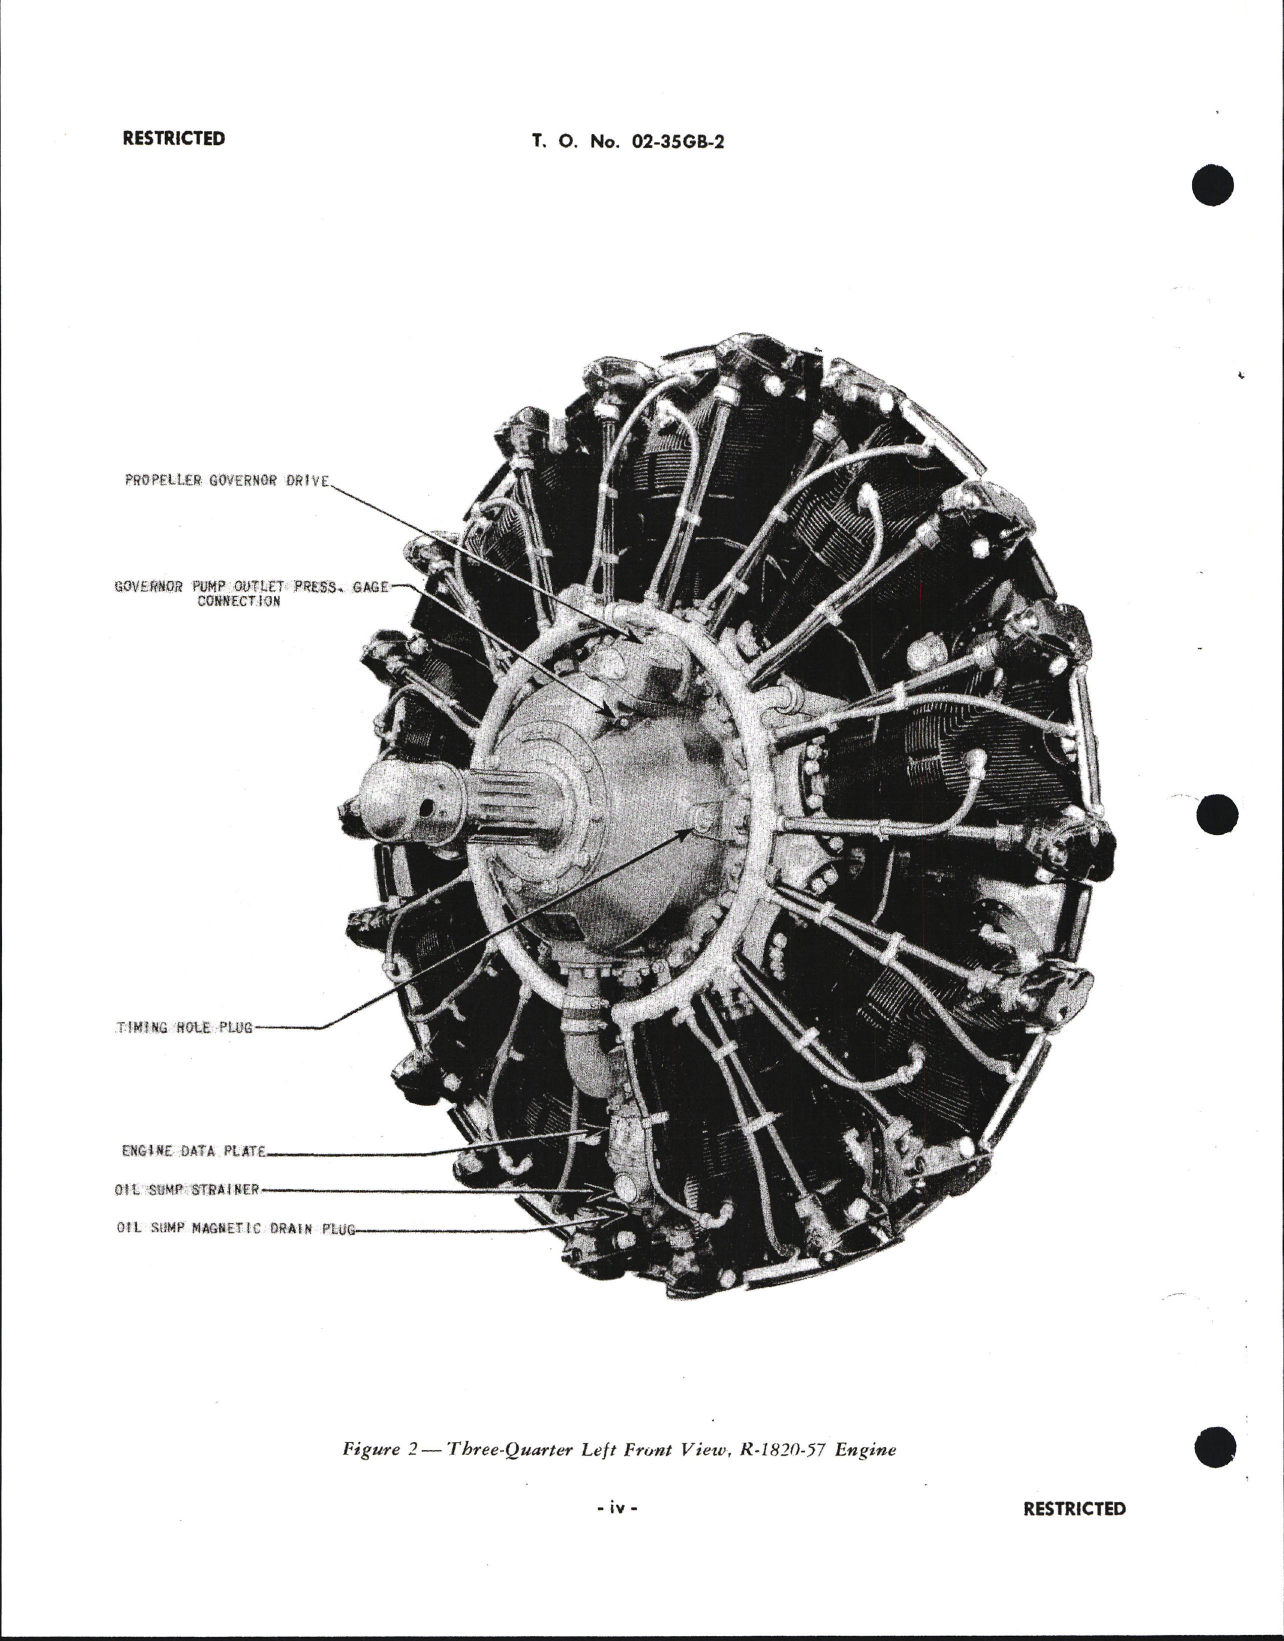 Sample page 6 from AirCorps Library document: Service Instructions for R-1820 Series